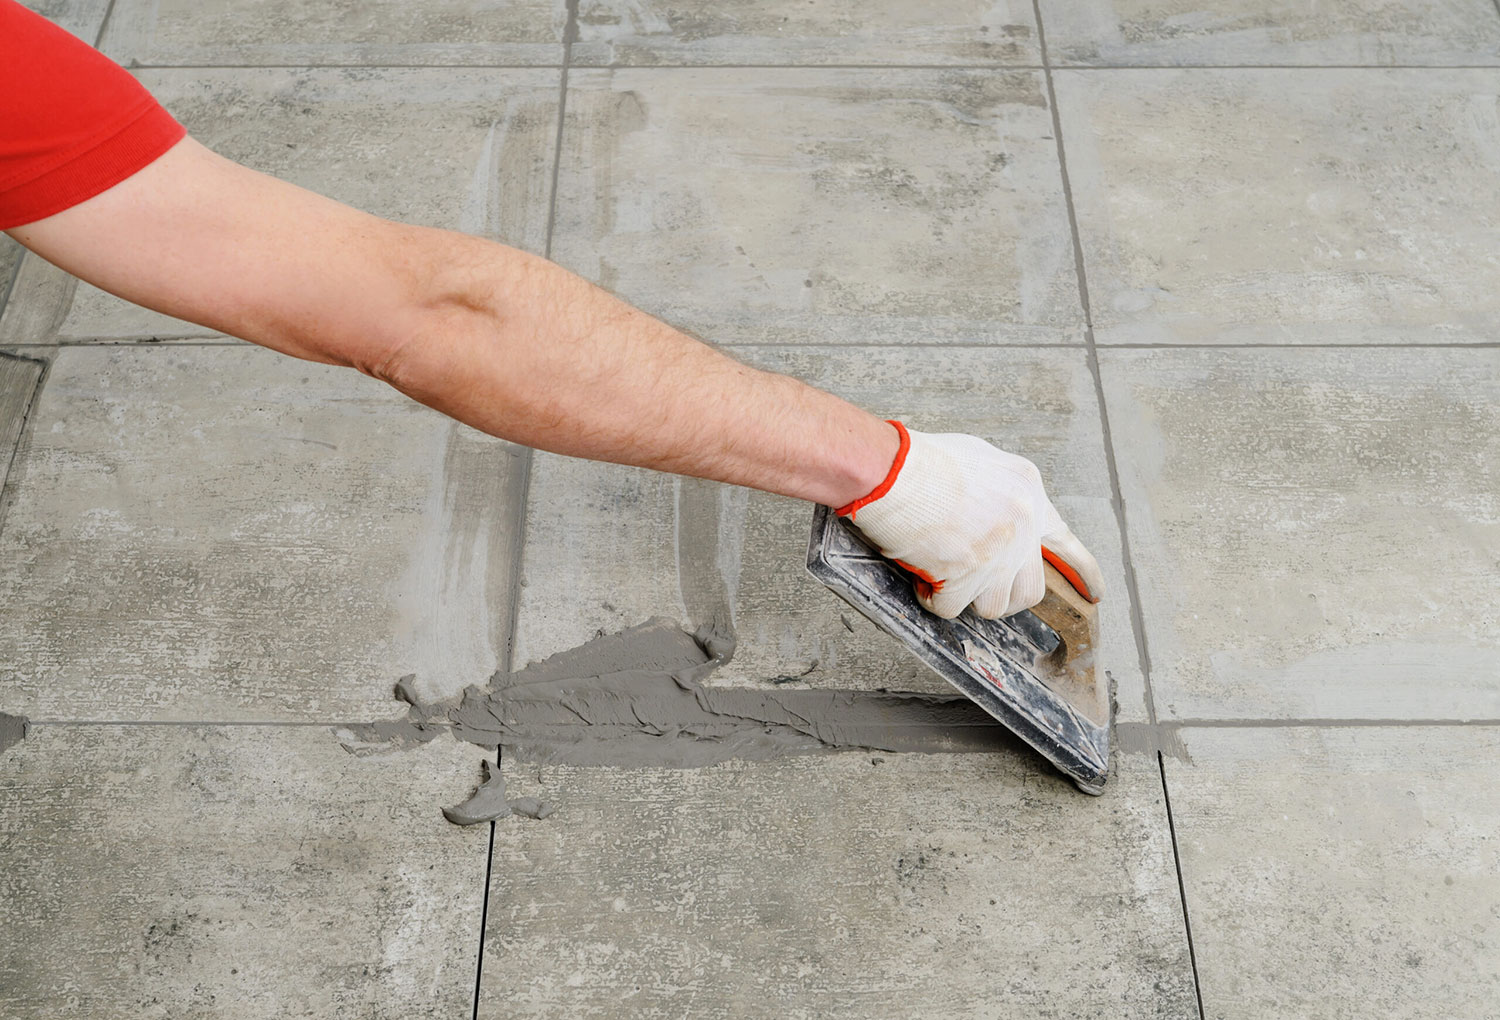 Partial grout repair or complete re-grouting? Grout solutions explained